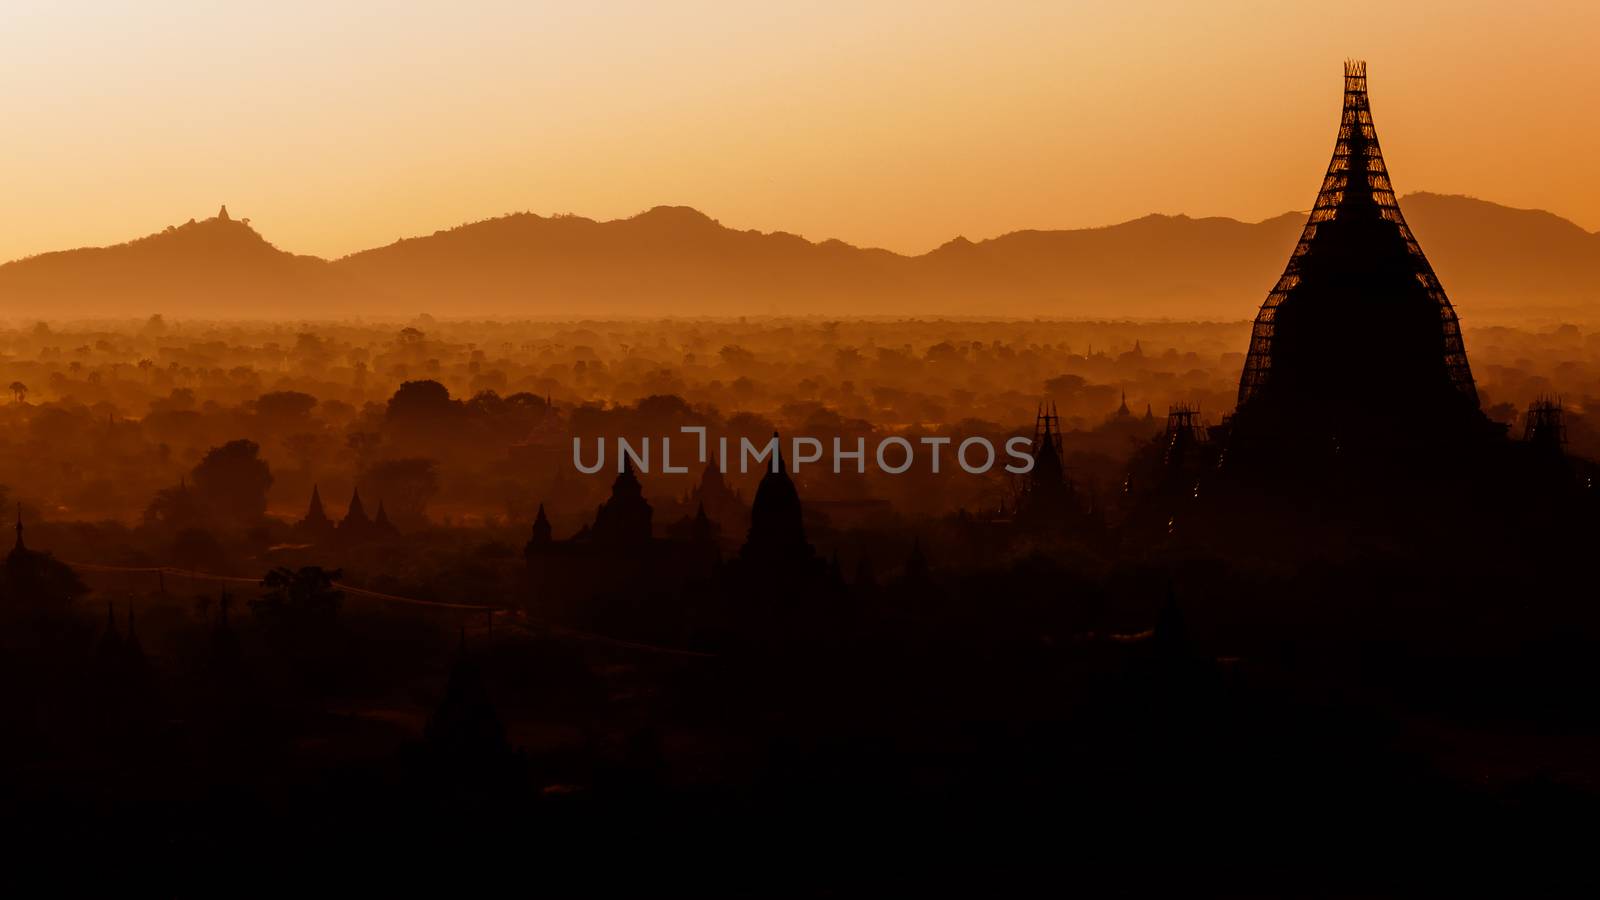 The sun is rising over the temples of Bagan